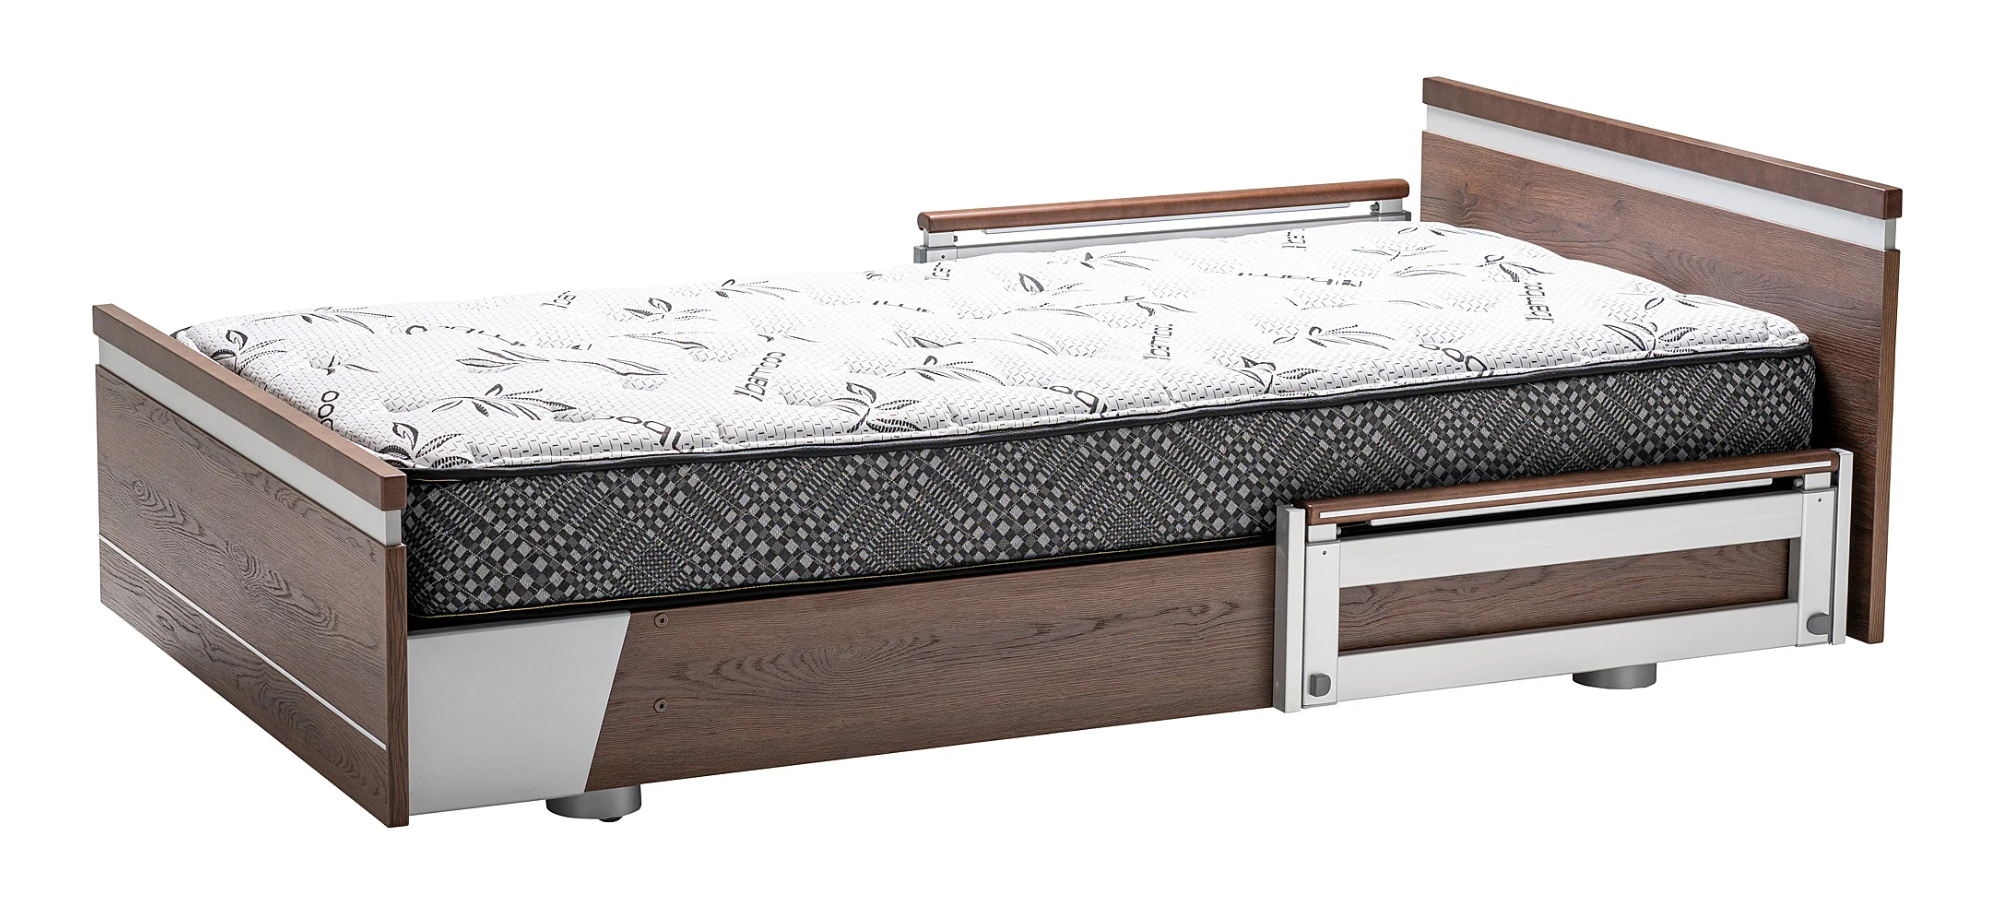 hospital bed Hospital Beds Available Nationwide In The United States & Canada - Luxury Hospital Bed Supplier